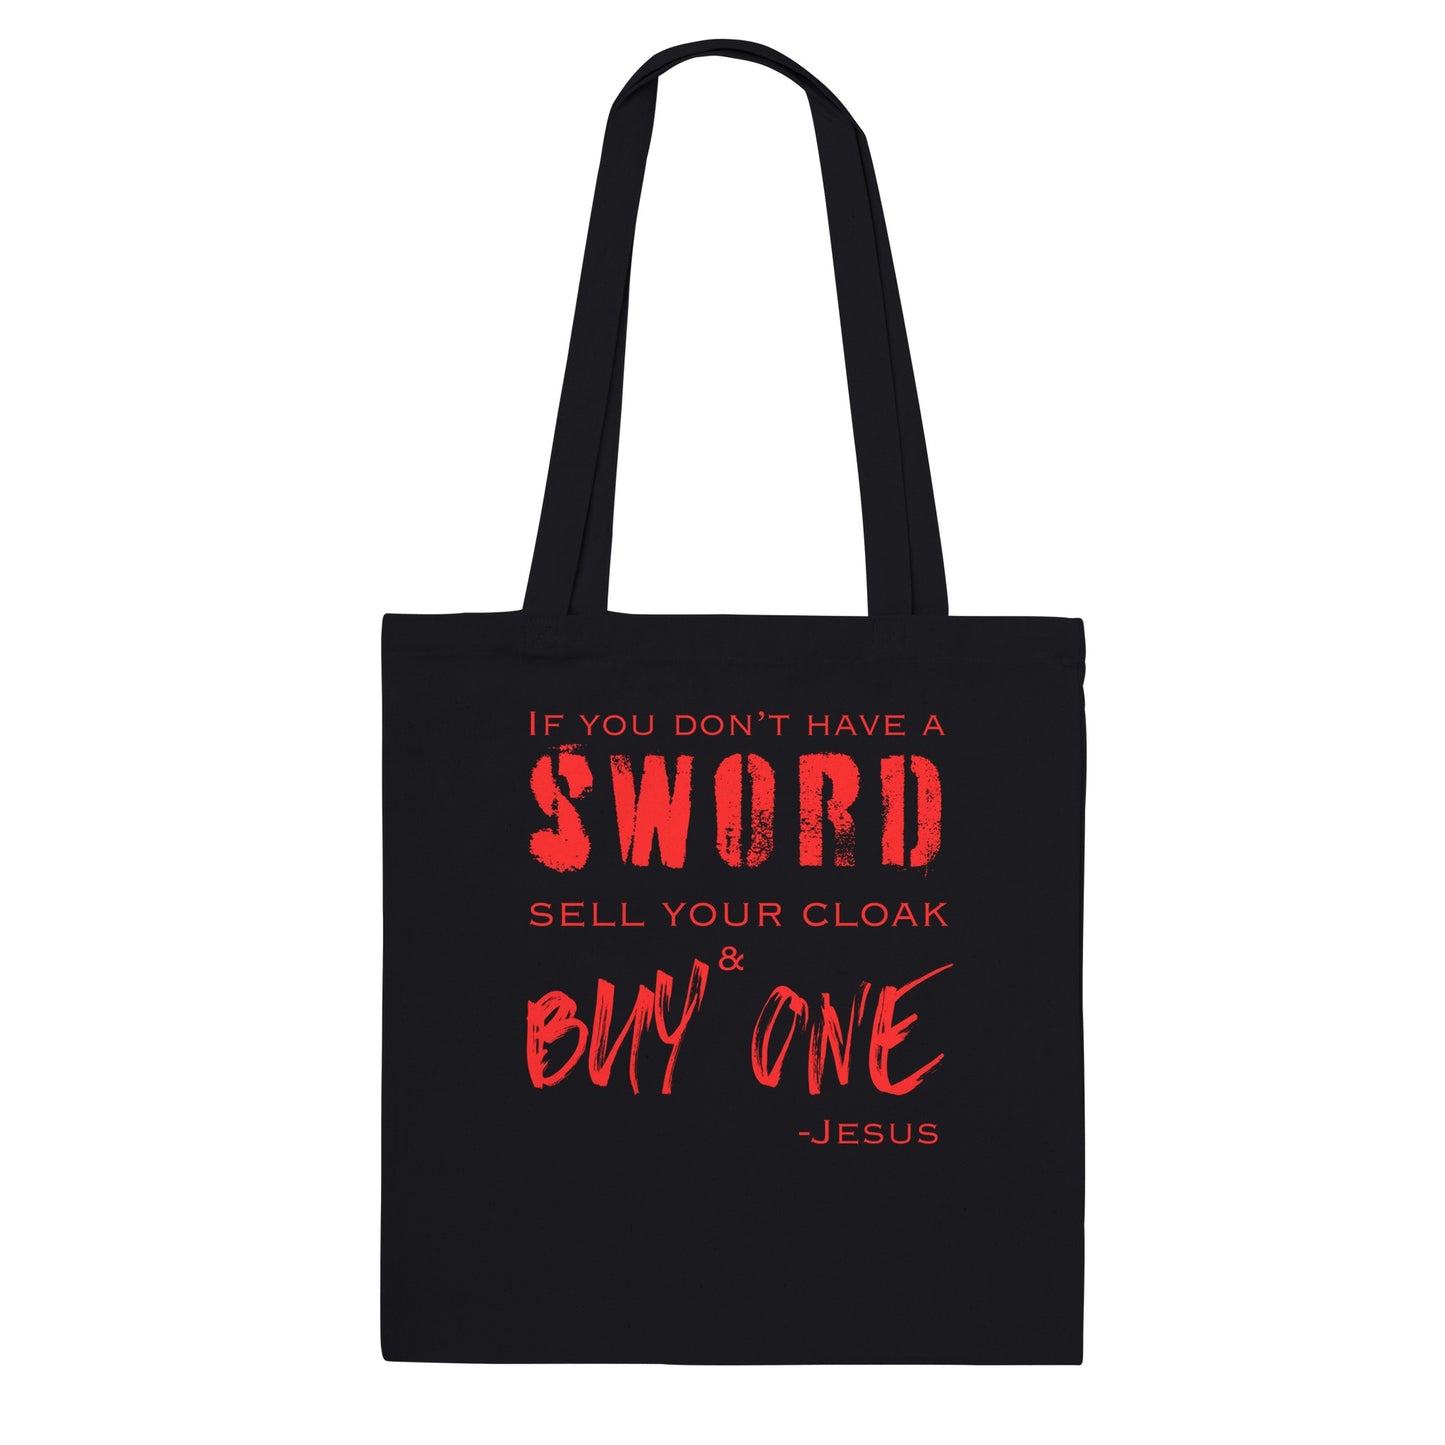 If you don't have a sword - Premium Tote Bag